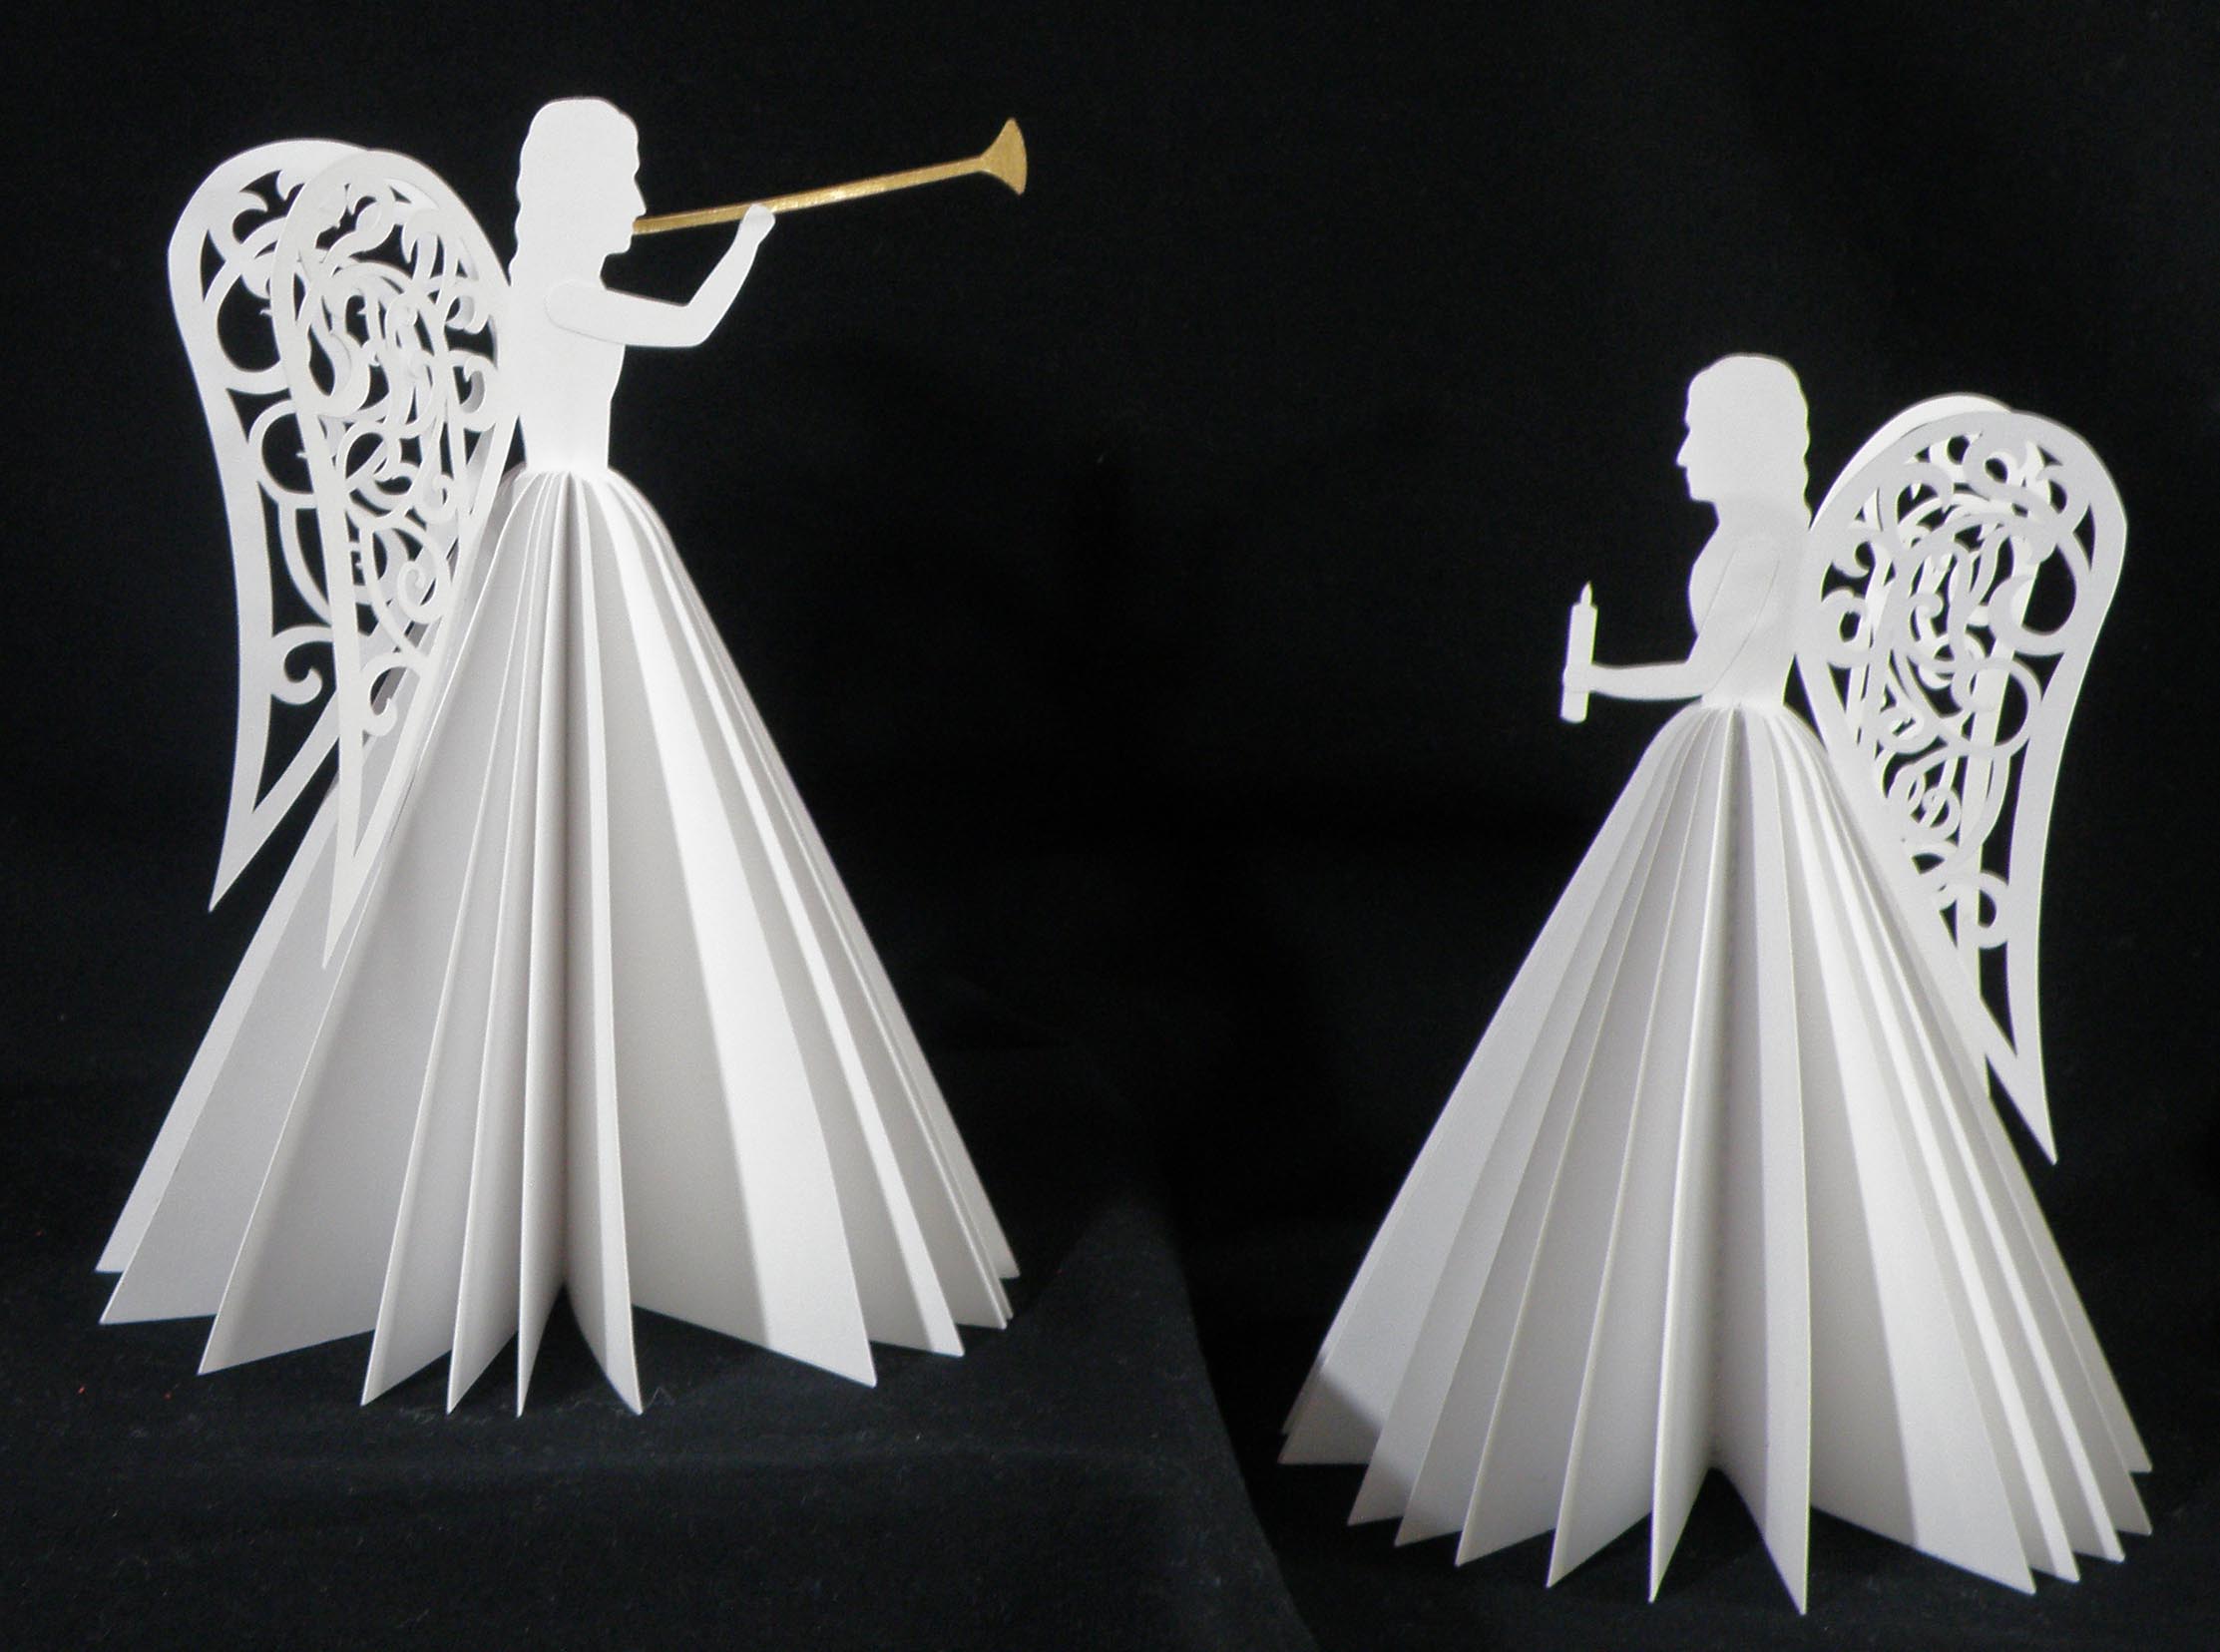 Cut out paper angels